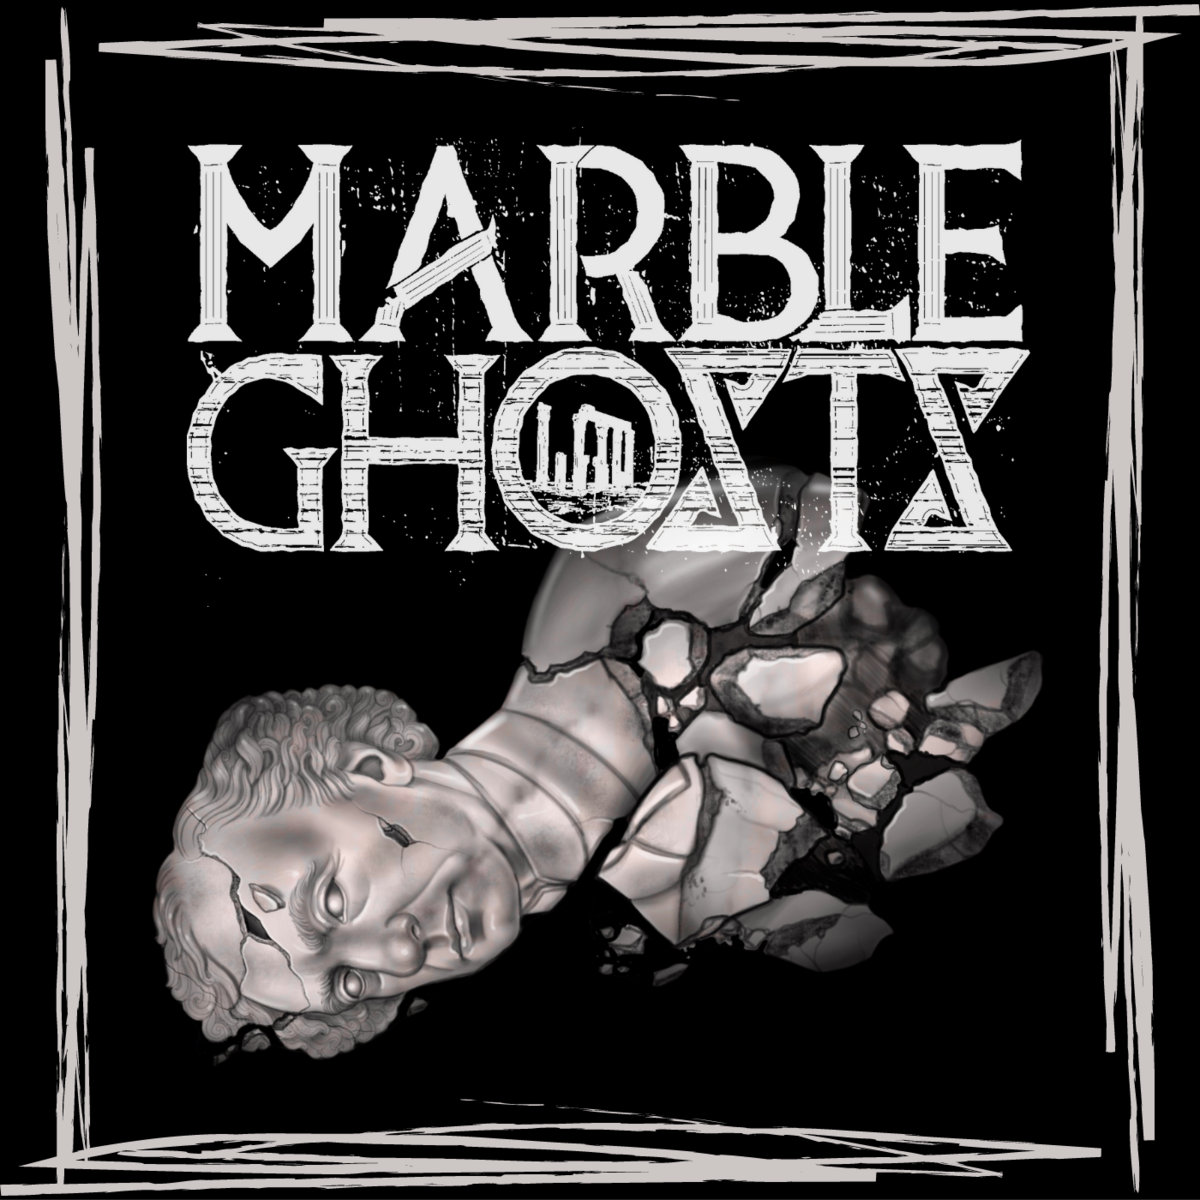 DEBUT EP REVIEW: Marble Ghosts by Marble Ghosts